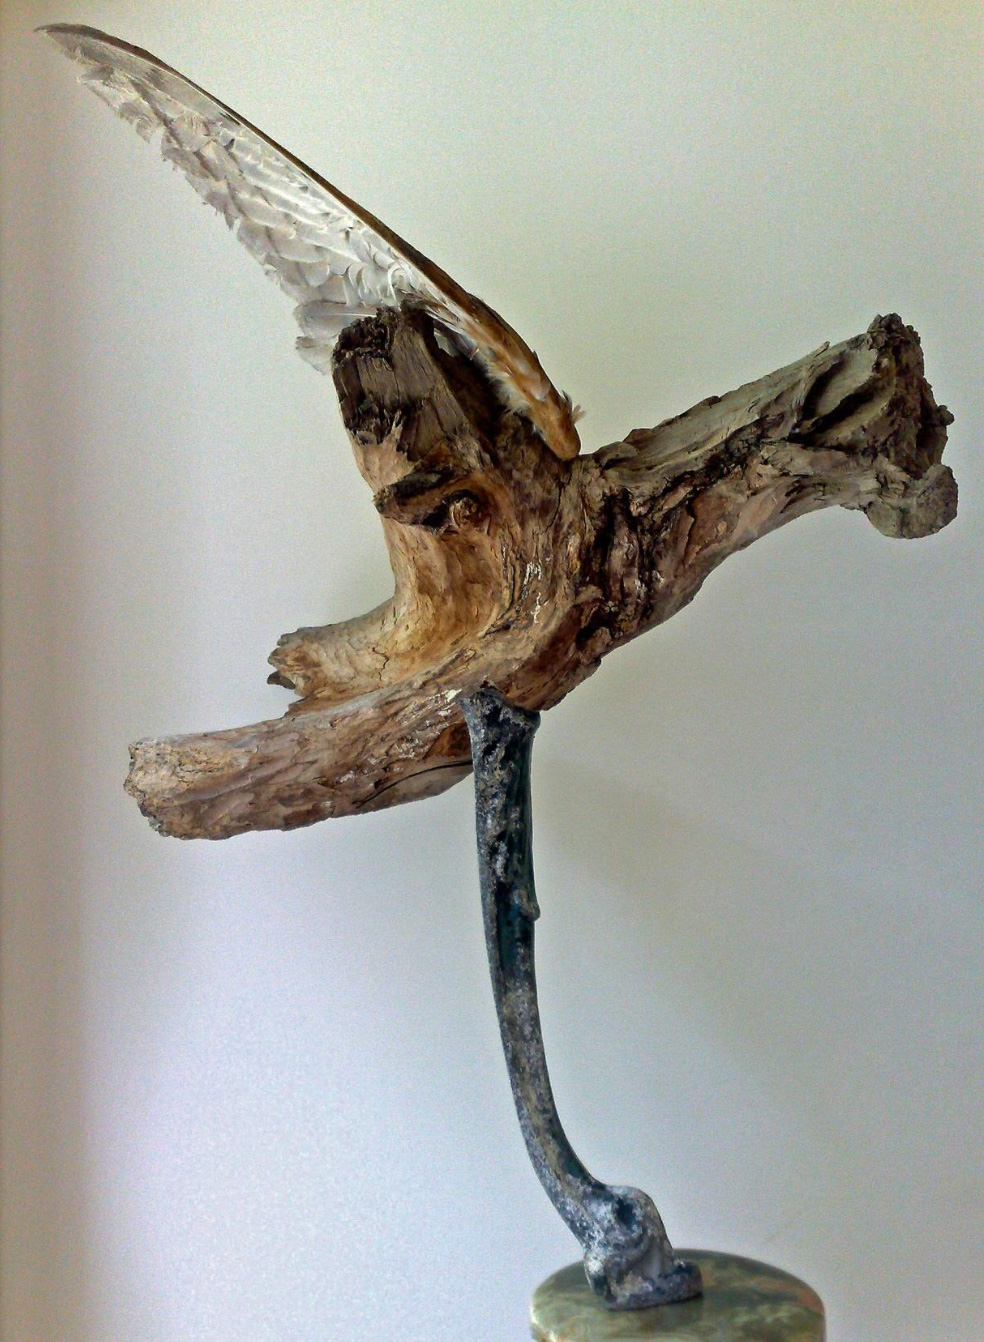 Transformation 2006, wood, waste materials and feathers